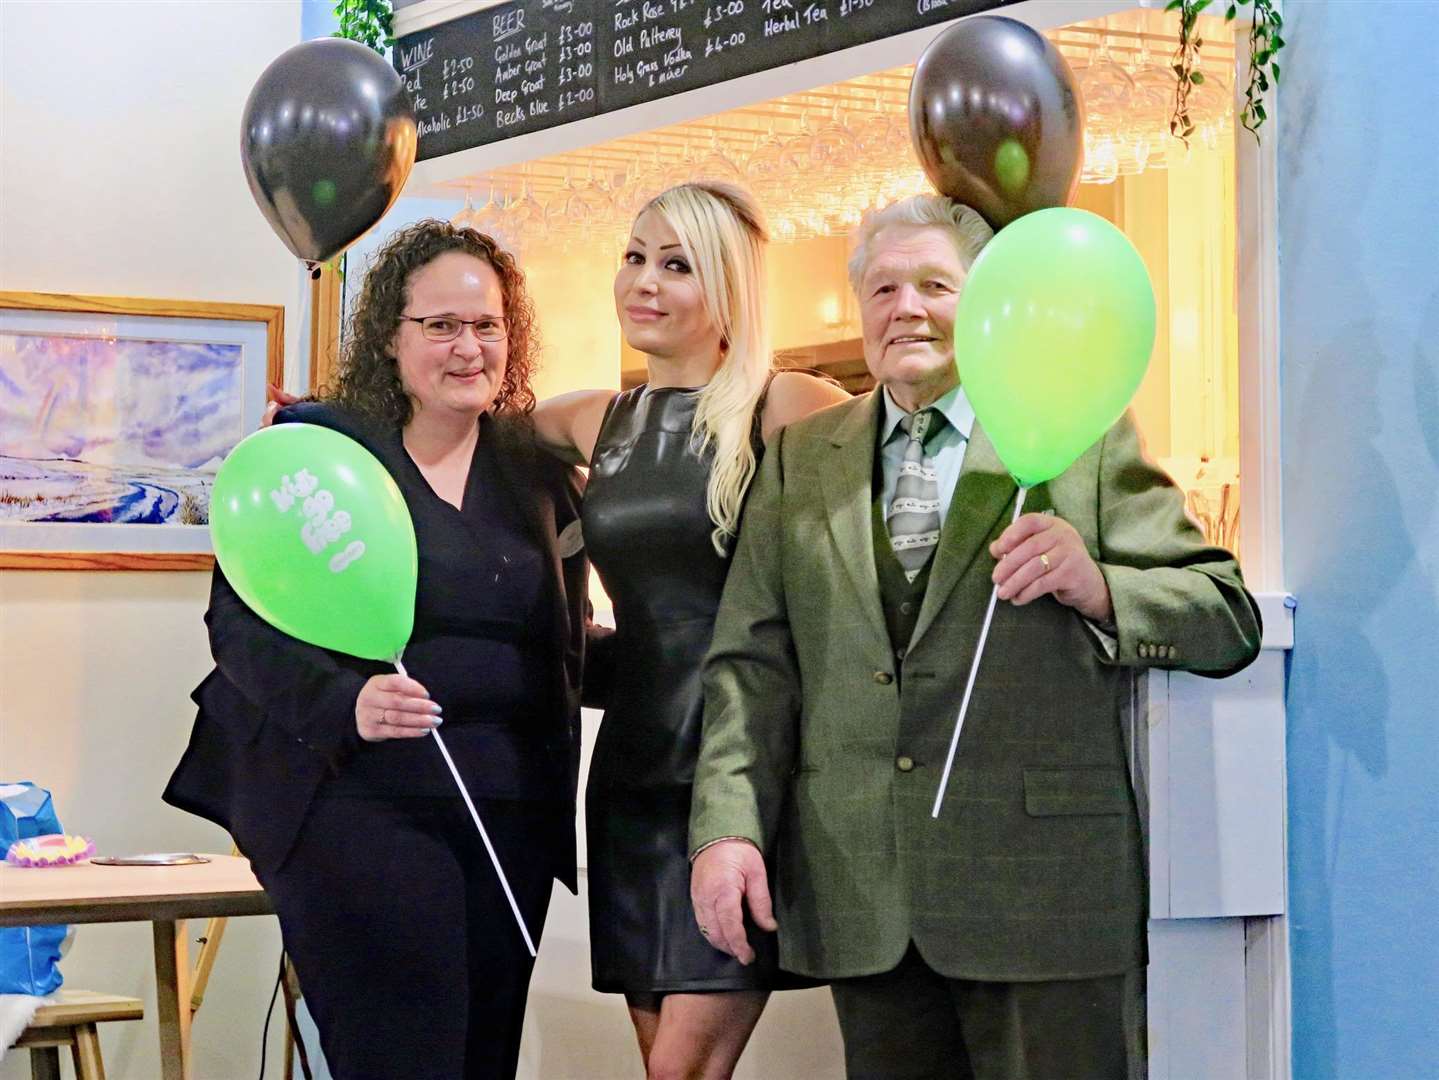 Marie Bell from Specsavers (left) with Natalie and special guest Don Sutherland enjoying some fun during the annual quiz.